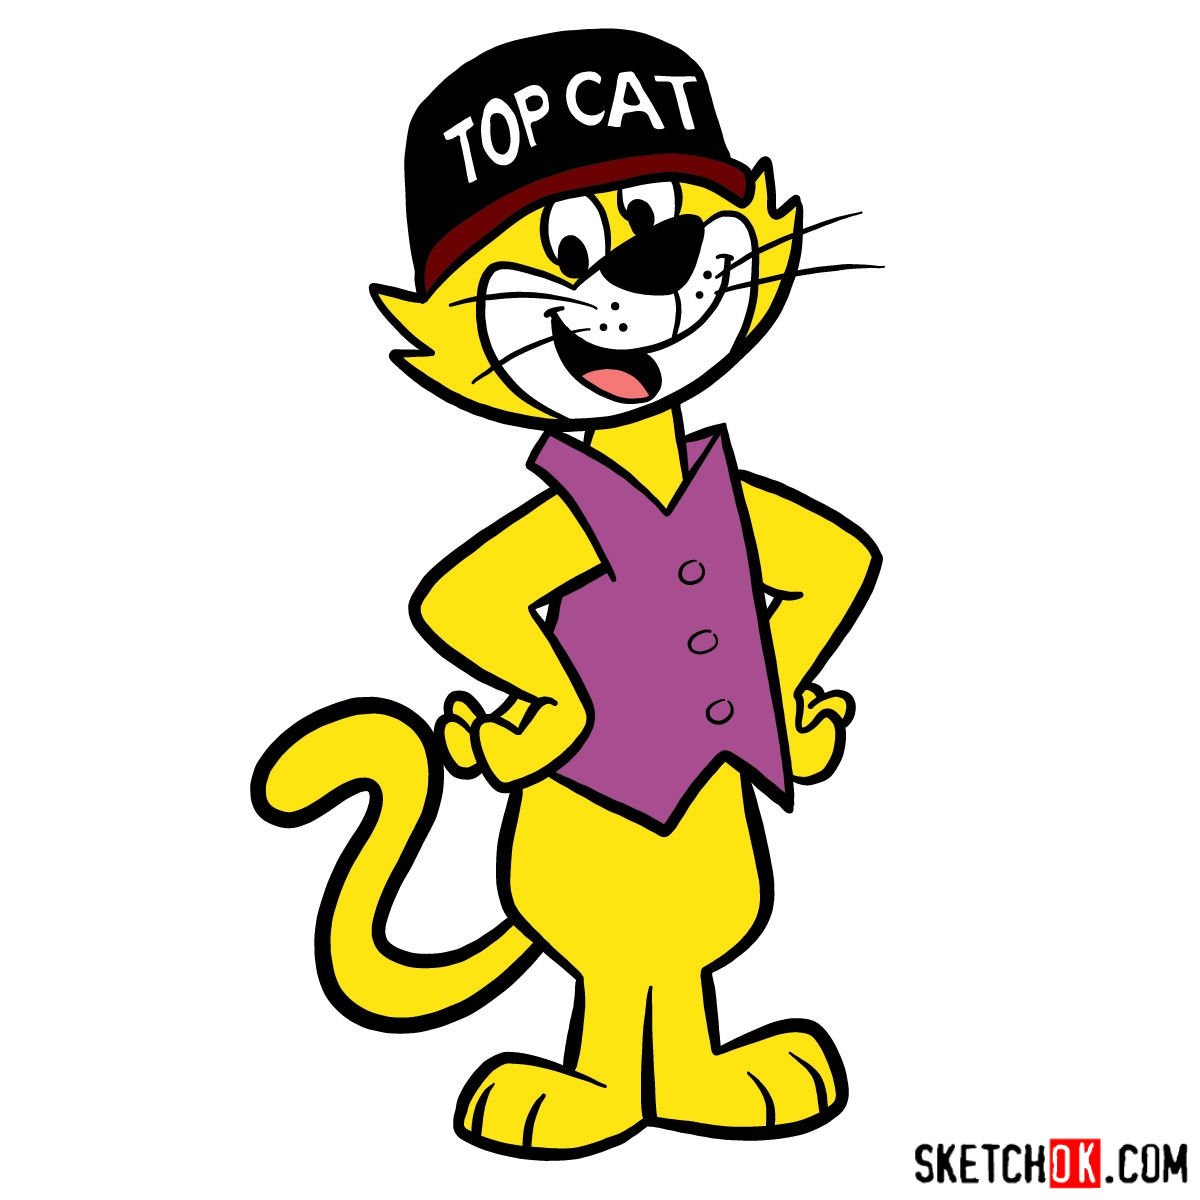 How to draw Top Cat